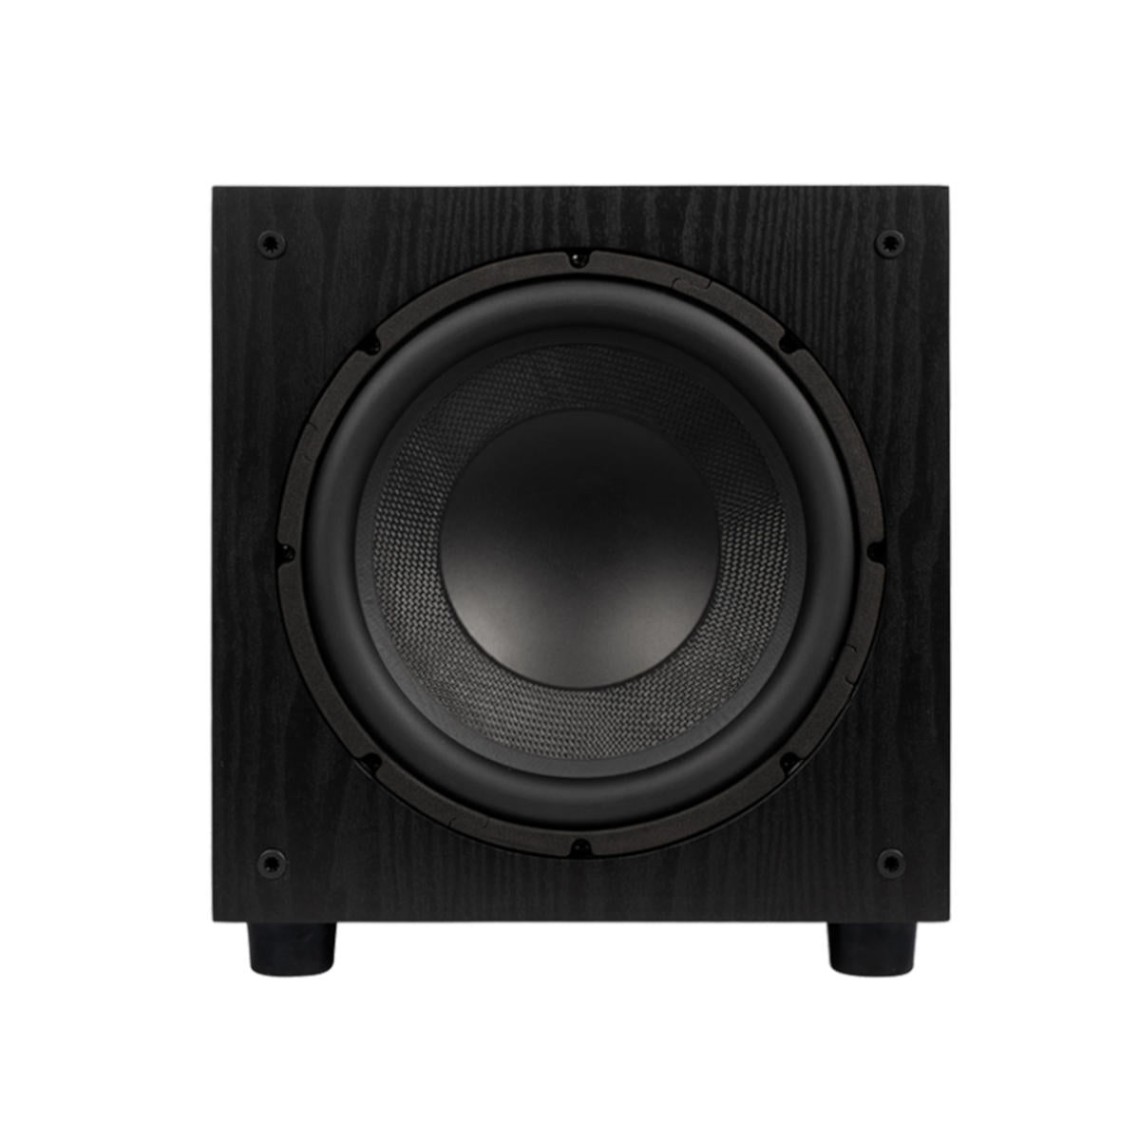 Elac AJ " Powered Subwoofer at best price in India